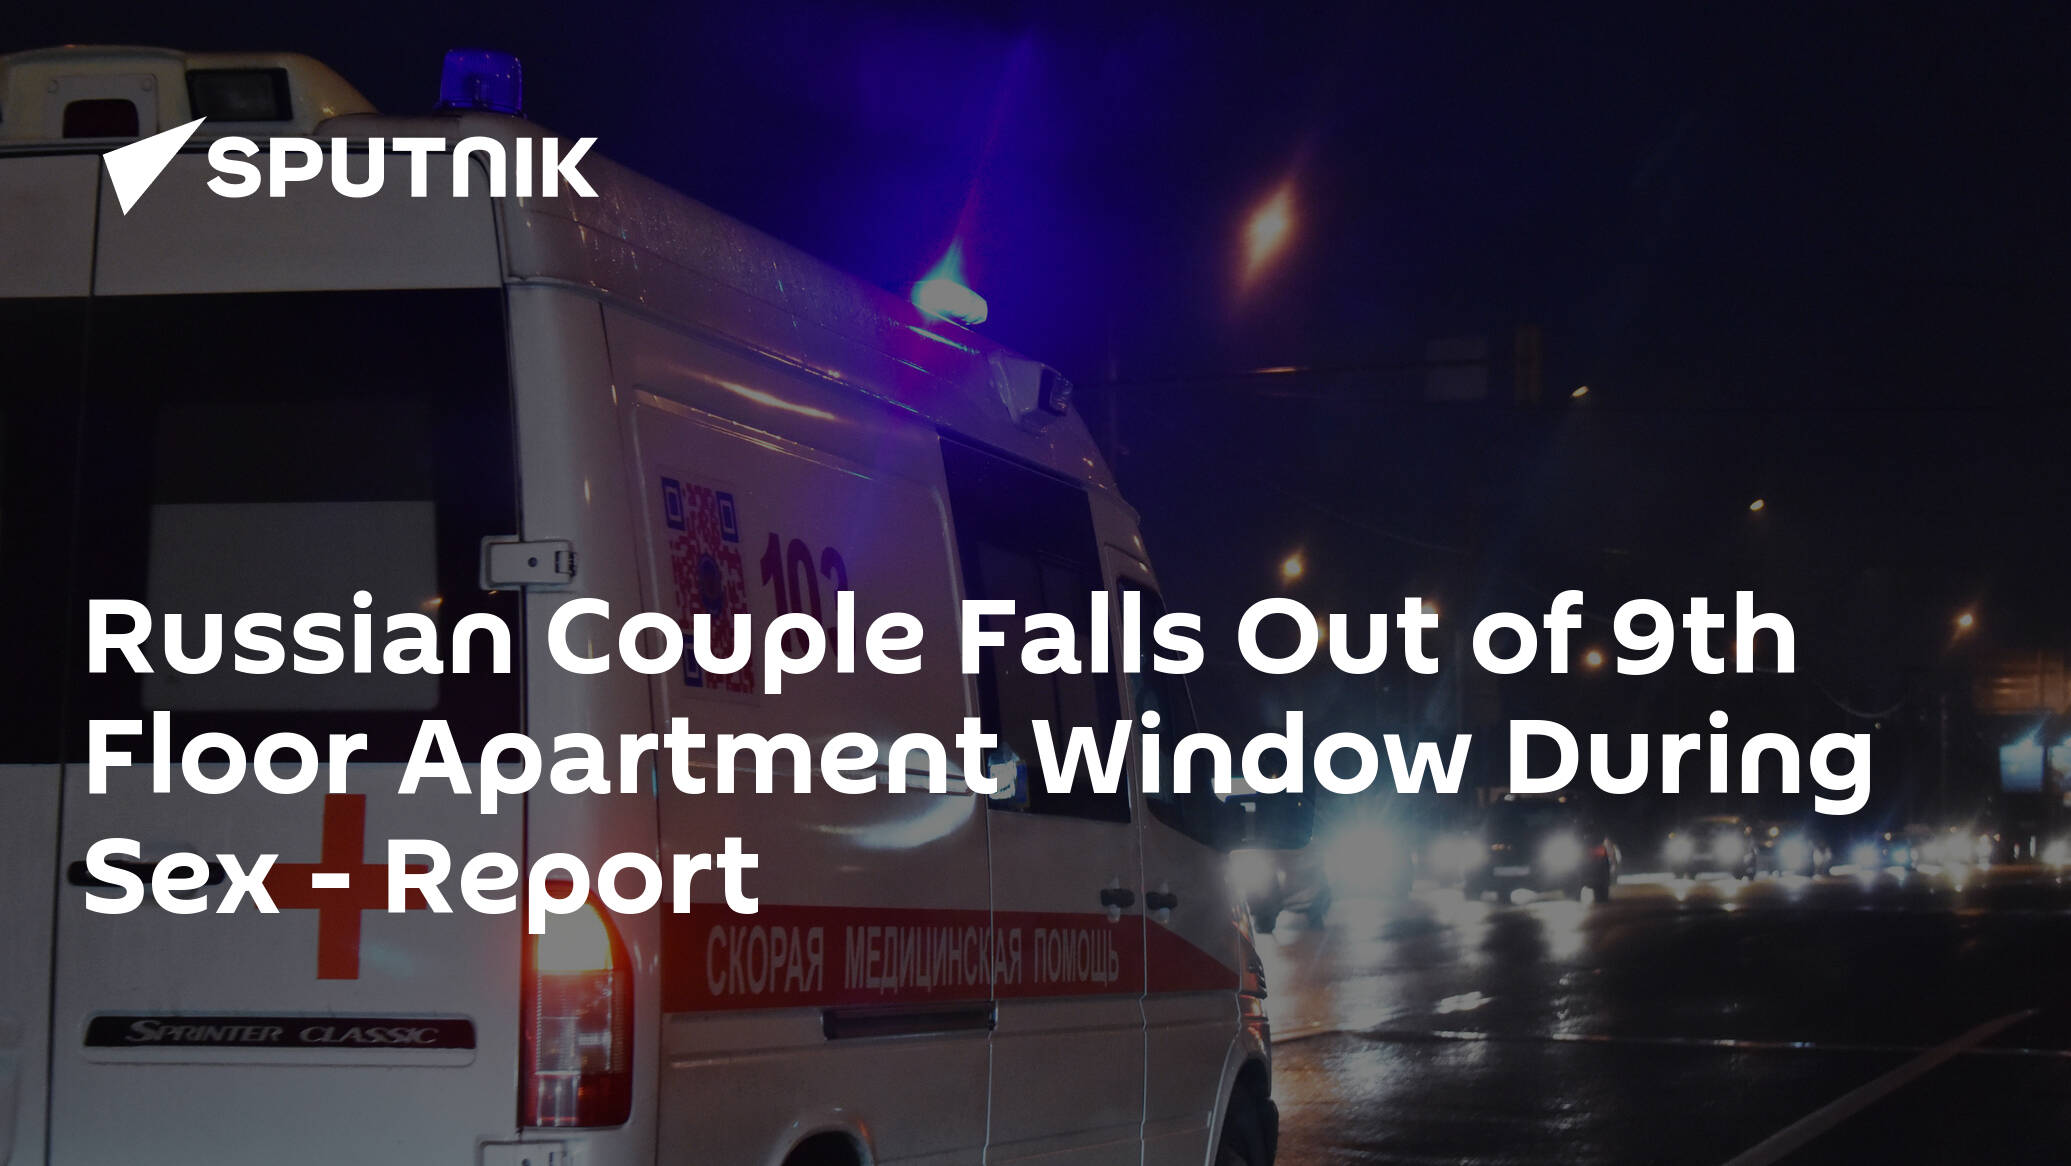 Russian Couple Falls Out of 9th Floor Apartment Window During